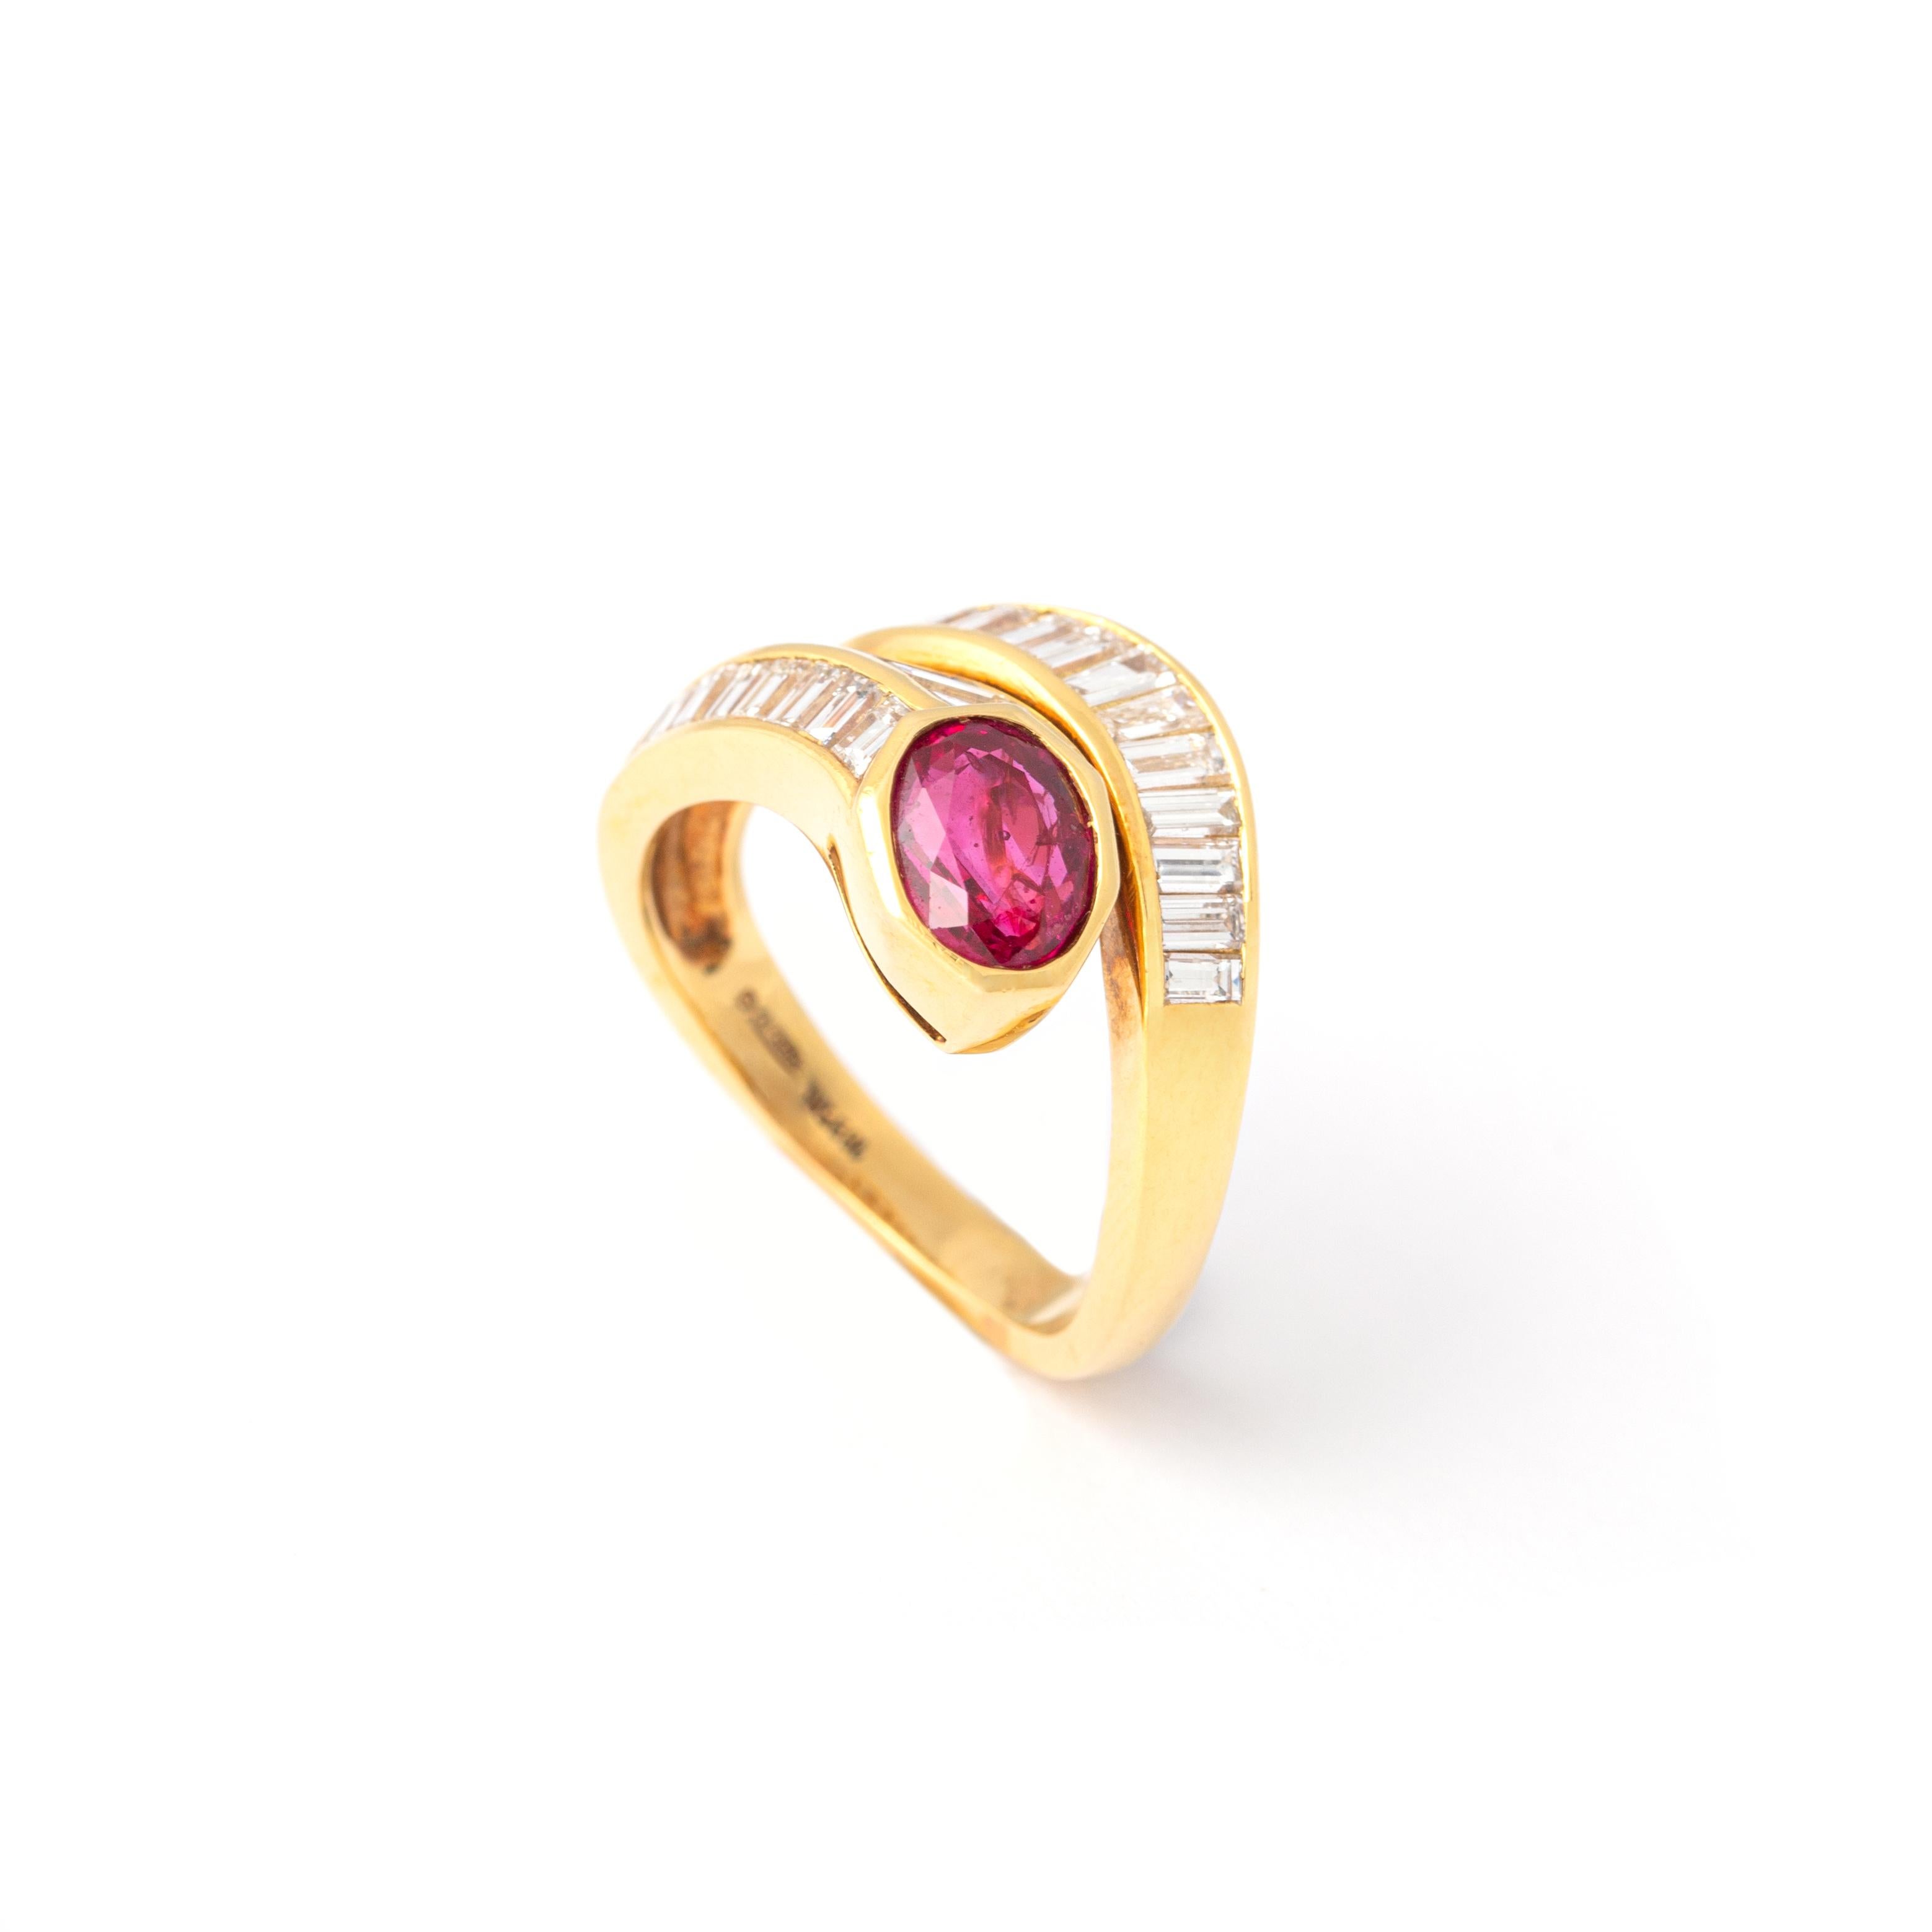 Ruby and Diamond Yellow Gold 18K Ring
Centered by an oval Ruby of 1.49 carat and Diamond of 2.8 carat total estimated F color and VVS2 clarity .
Size: 6.75
Total gross weight: 7.80 grams.

